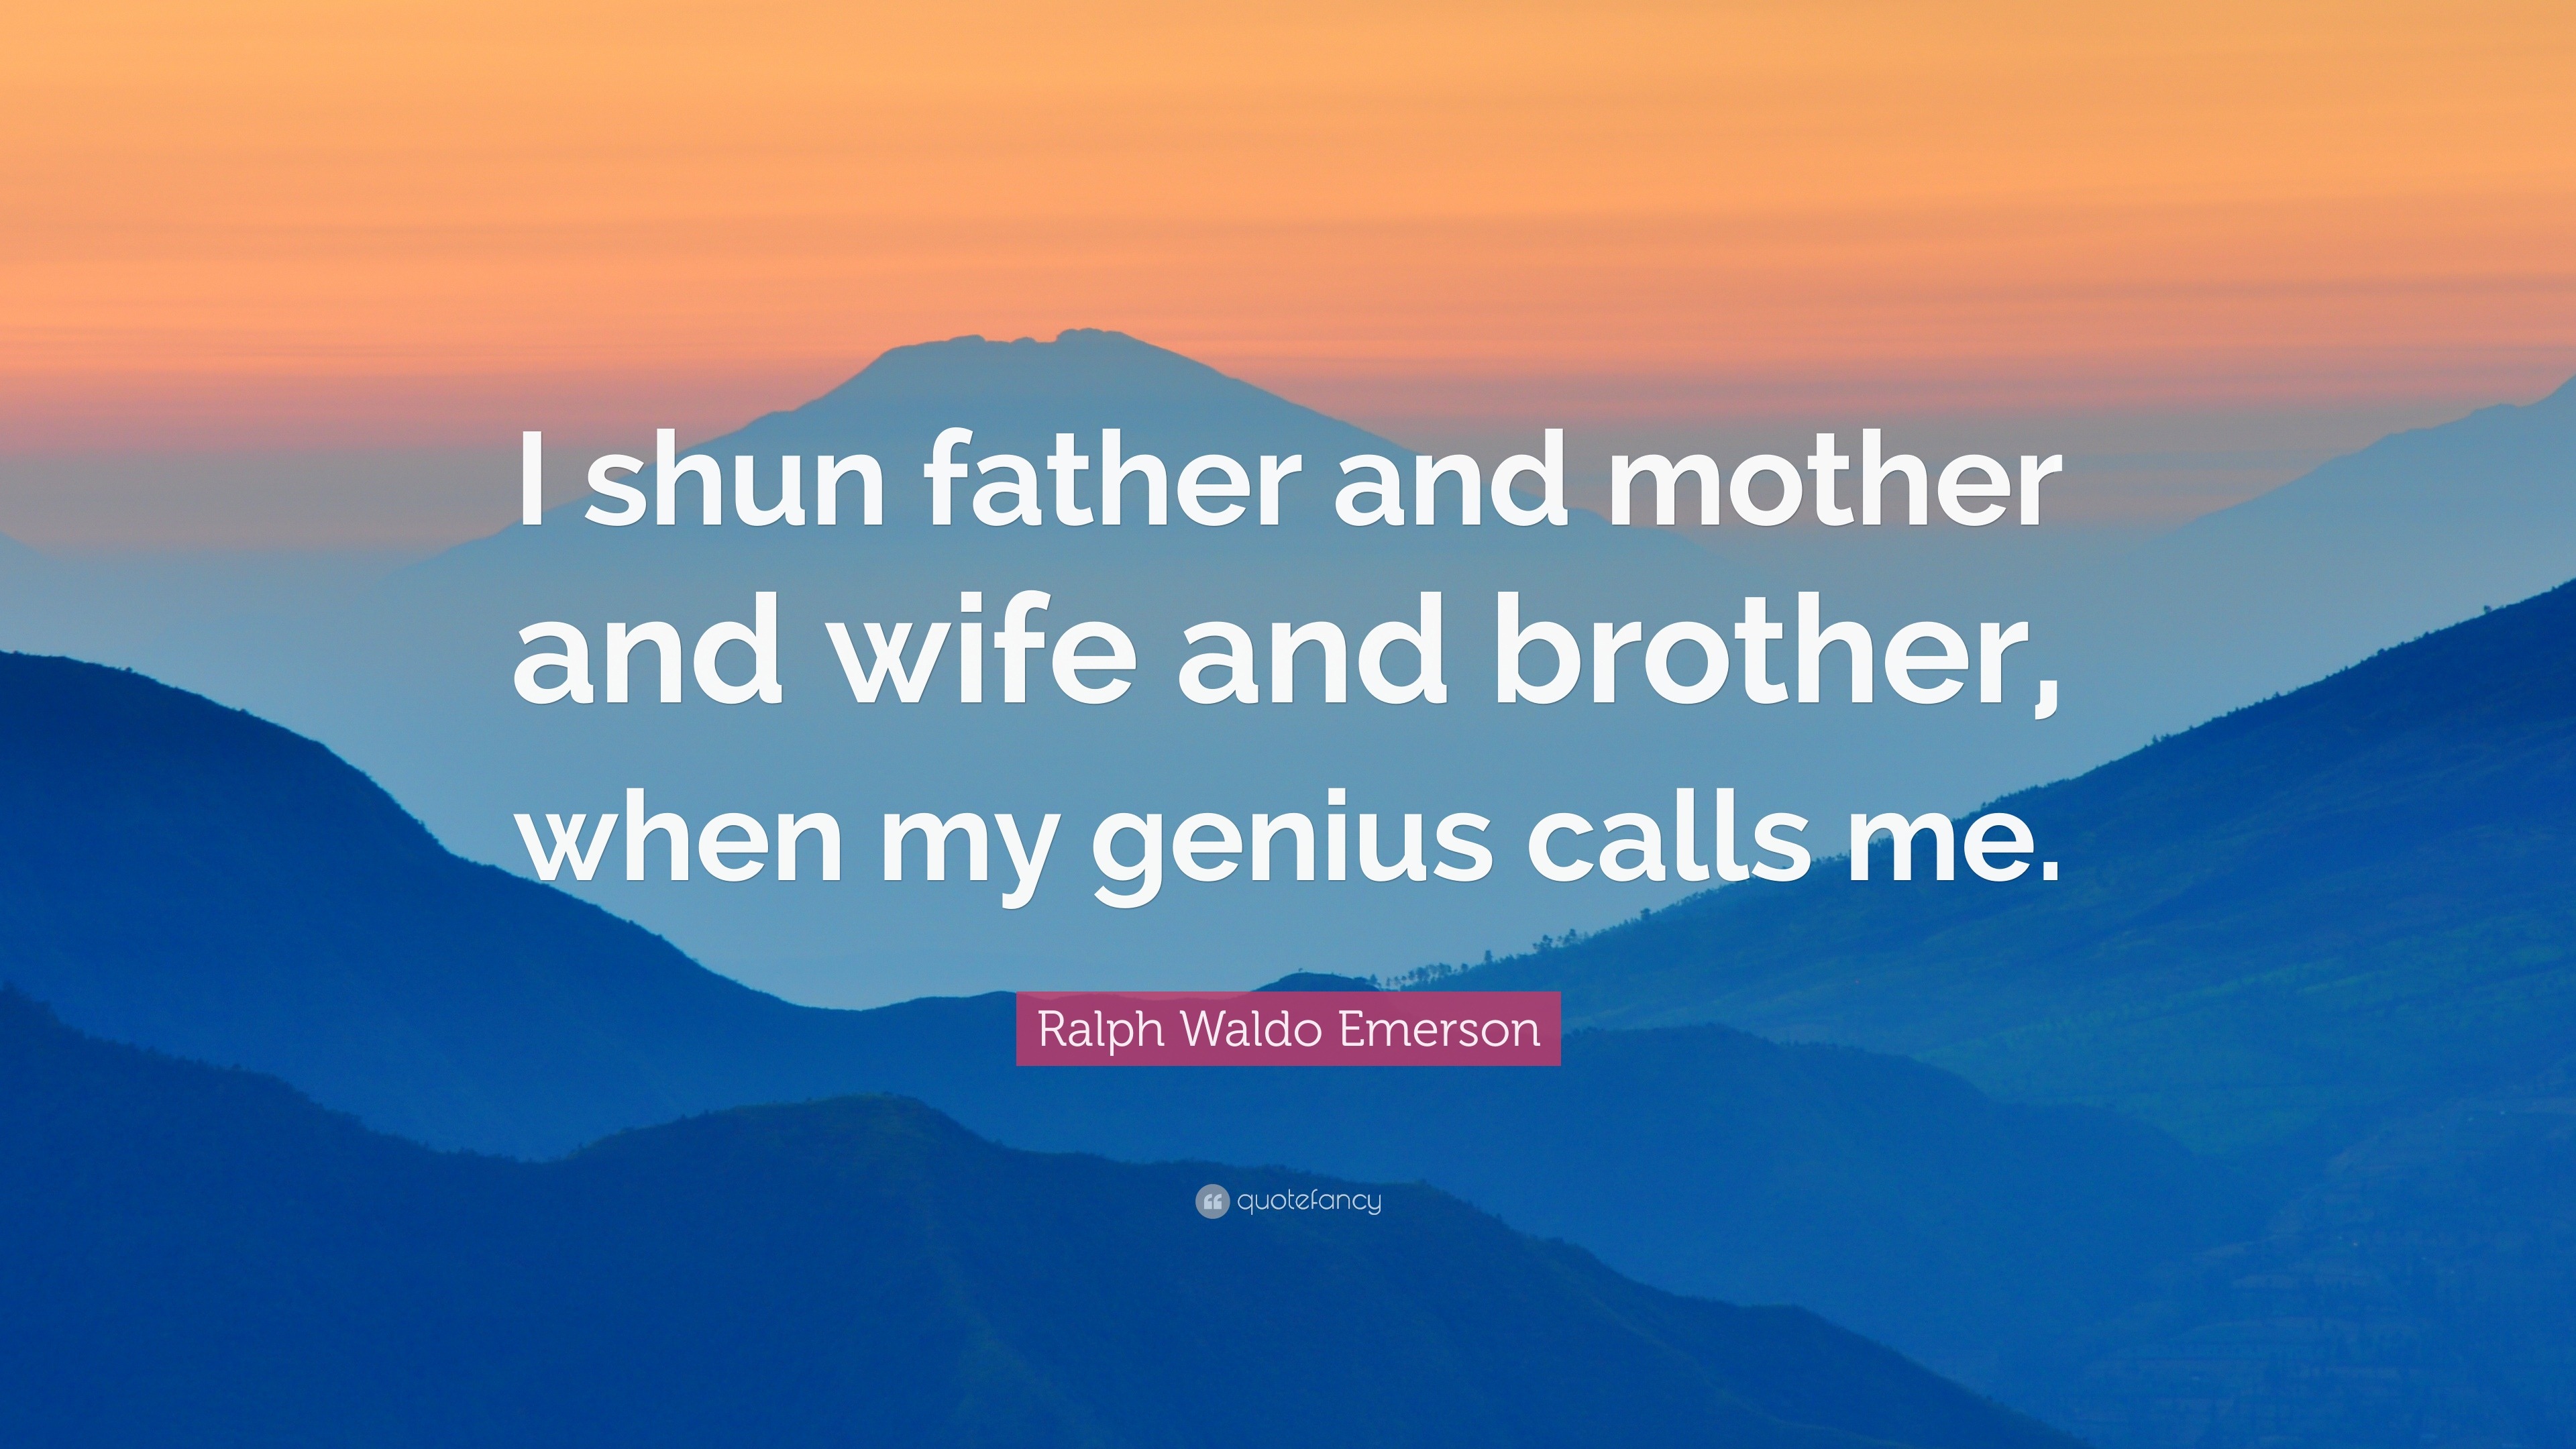 Ralph Waldo Emerson Quote: “I shun father and mother and wife and ...